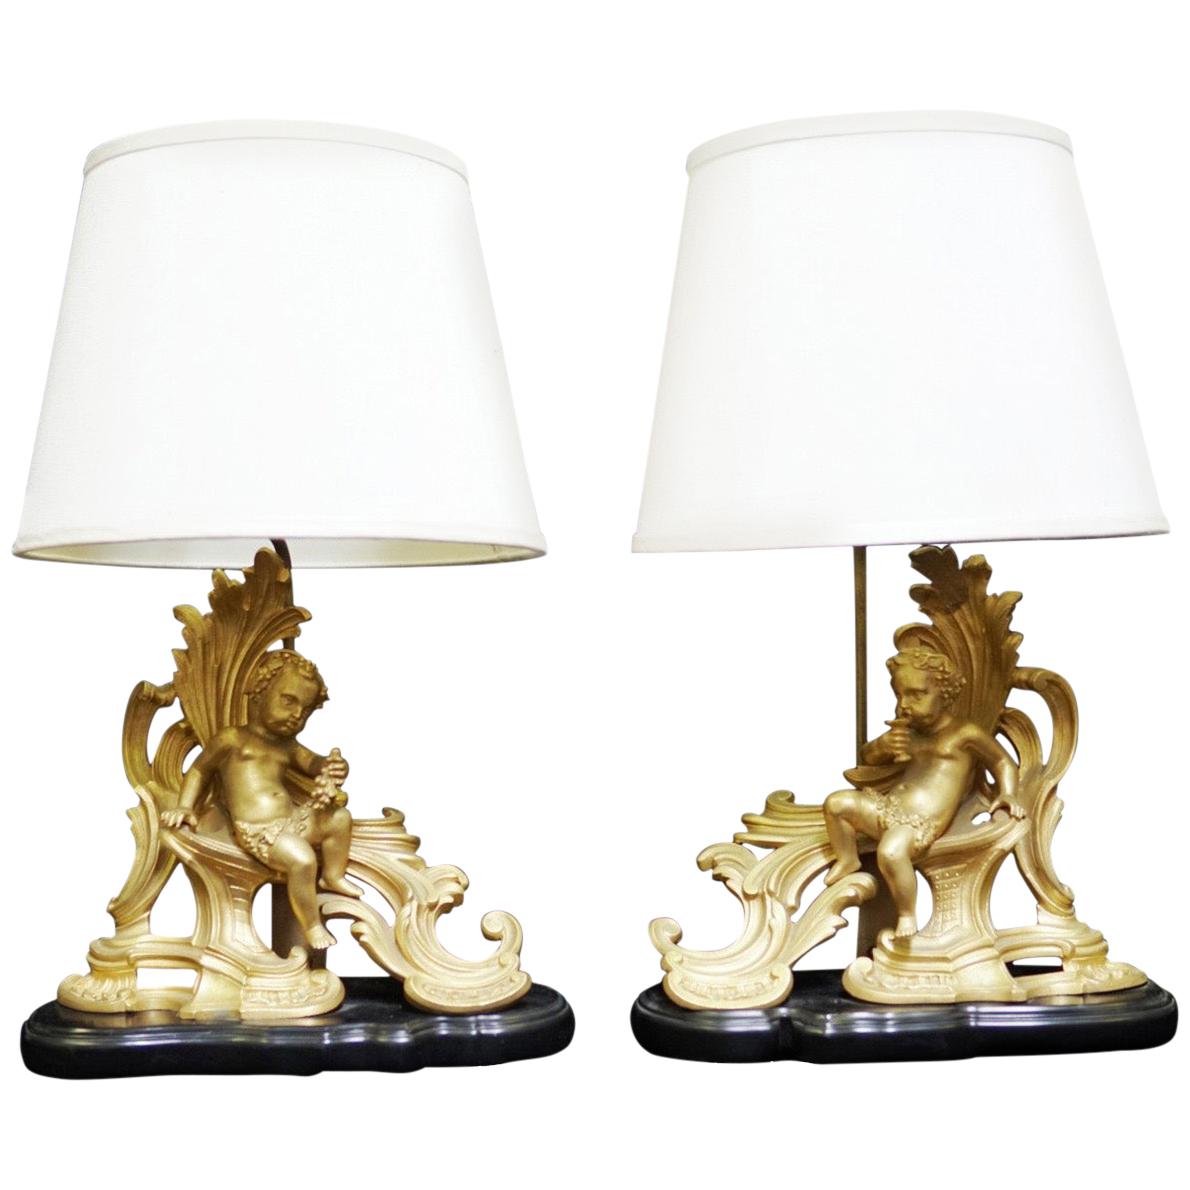 Pair of French Ormolu Gilt Bronze Chenet Mounted Lamps